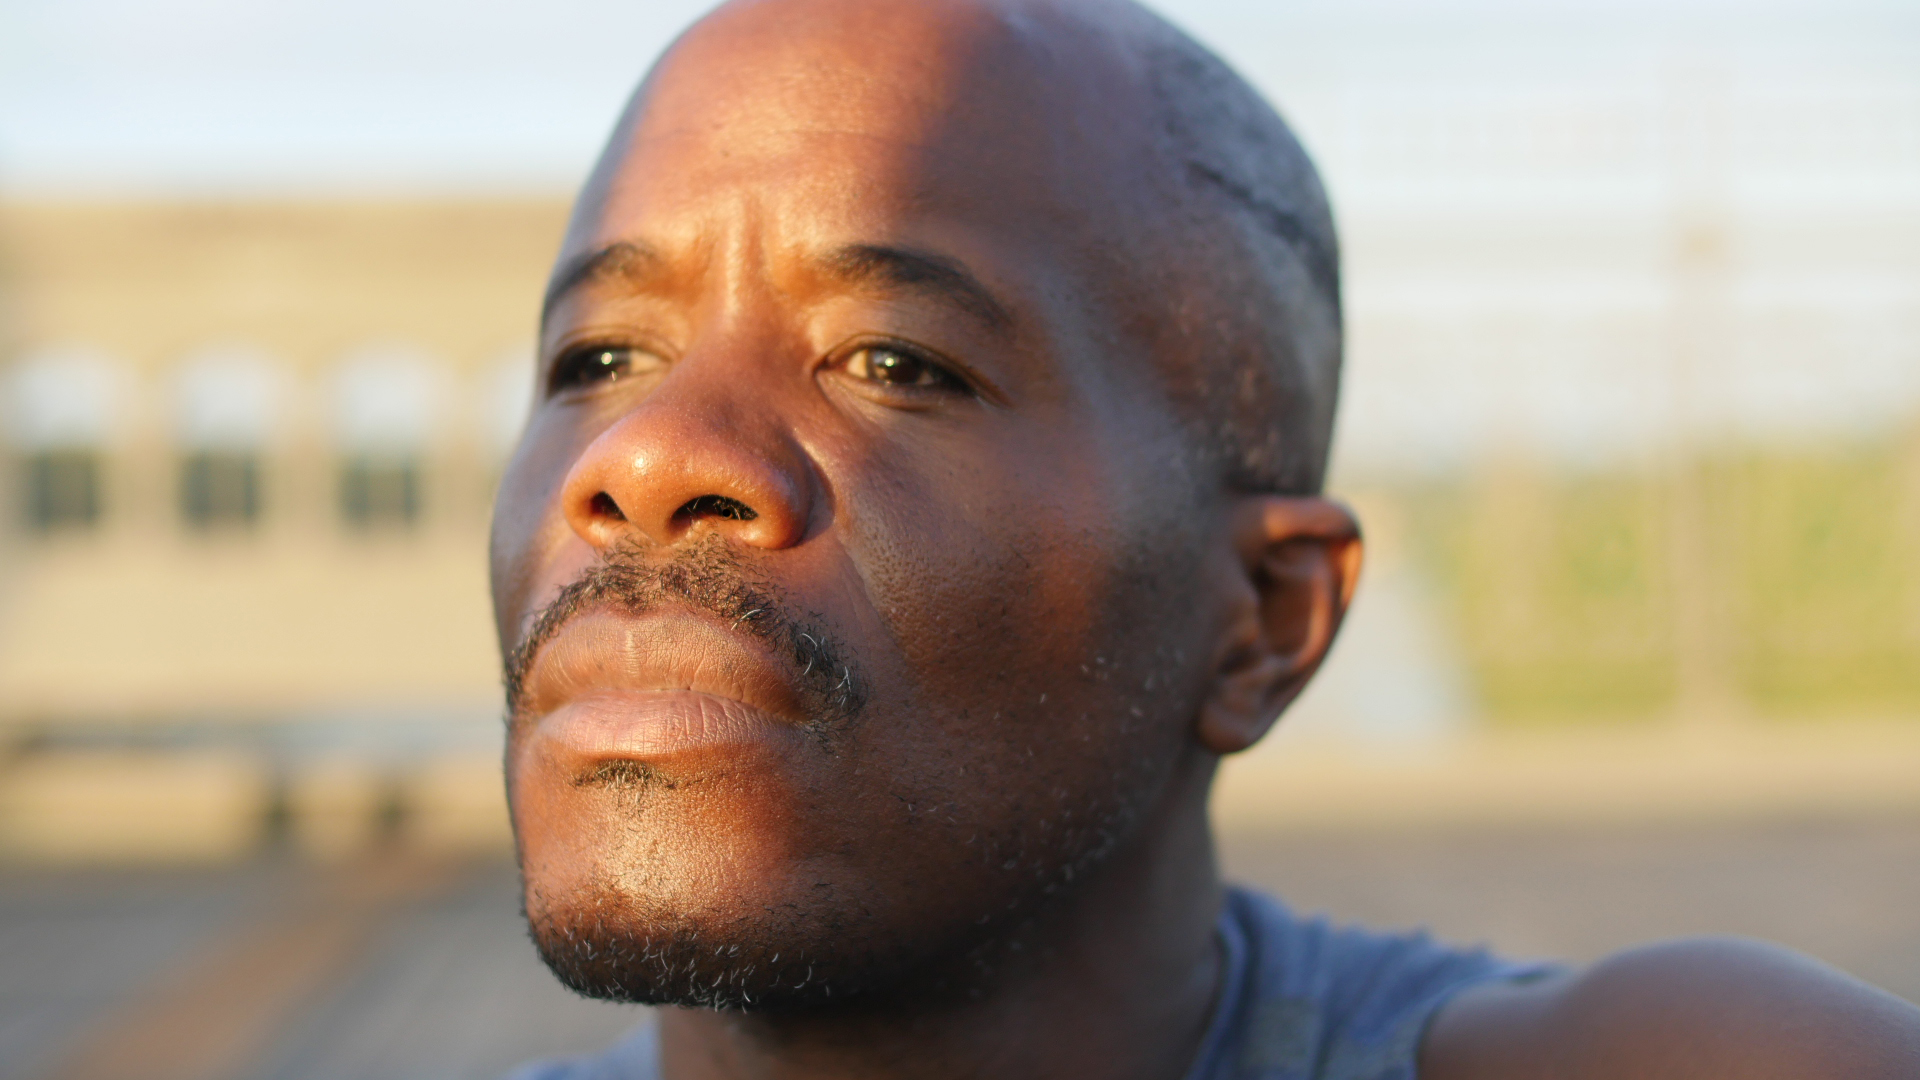 A man stares forward, seemingly deep in thought. His face is very close to the camera. Behind him, a natural area is out of focus. 